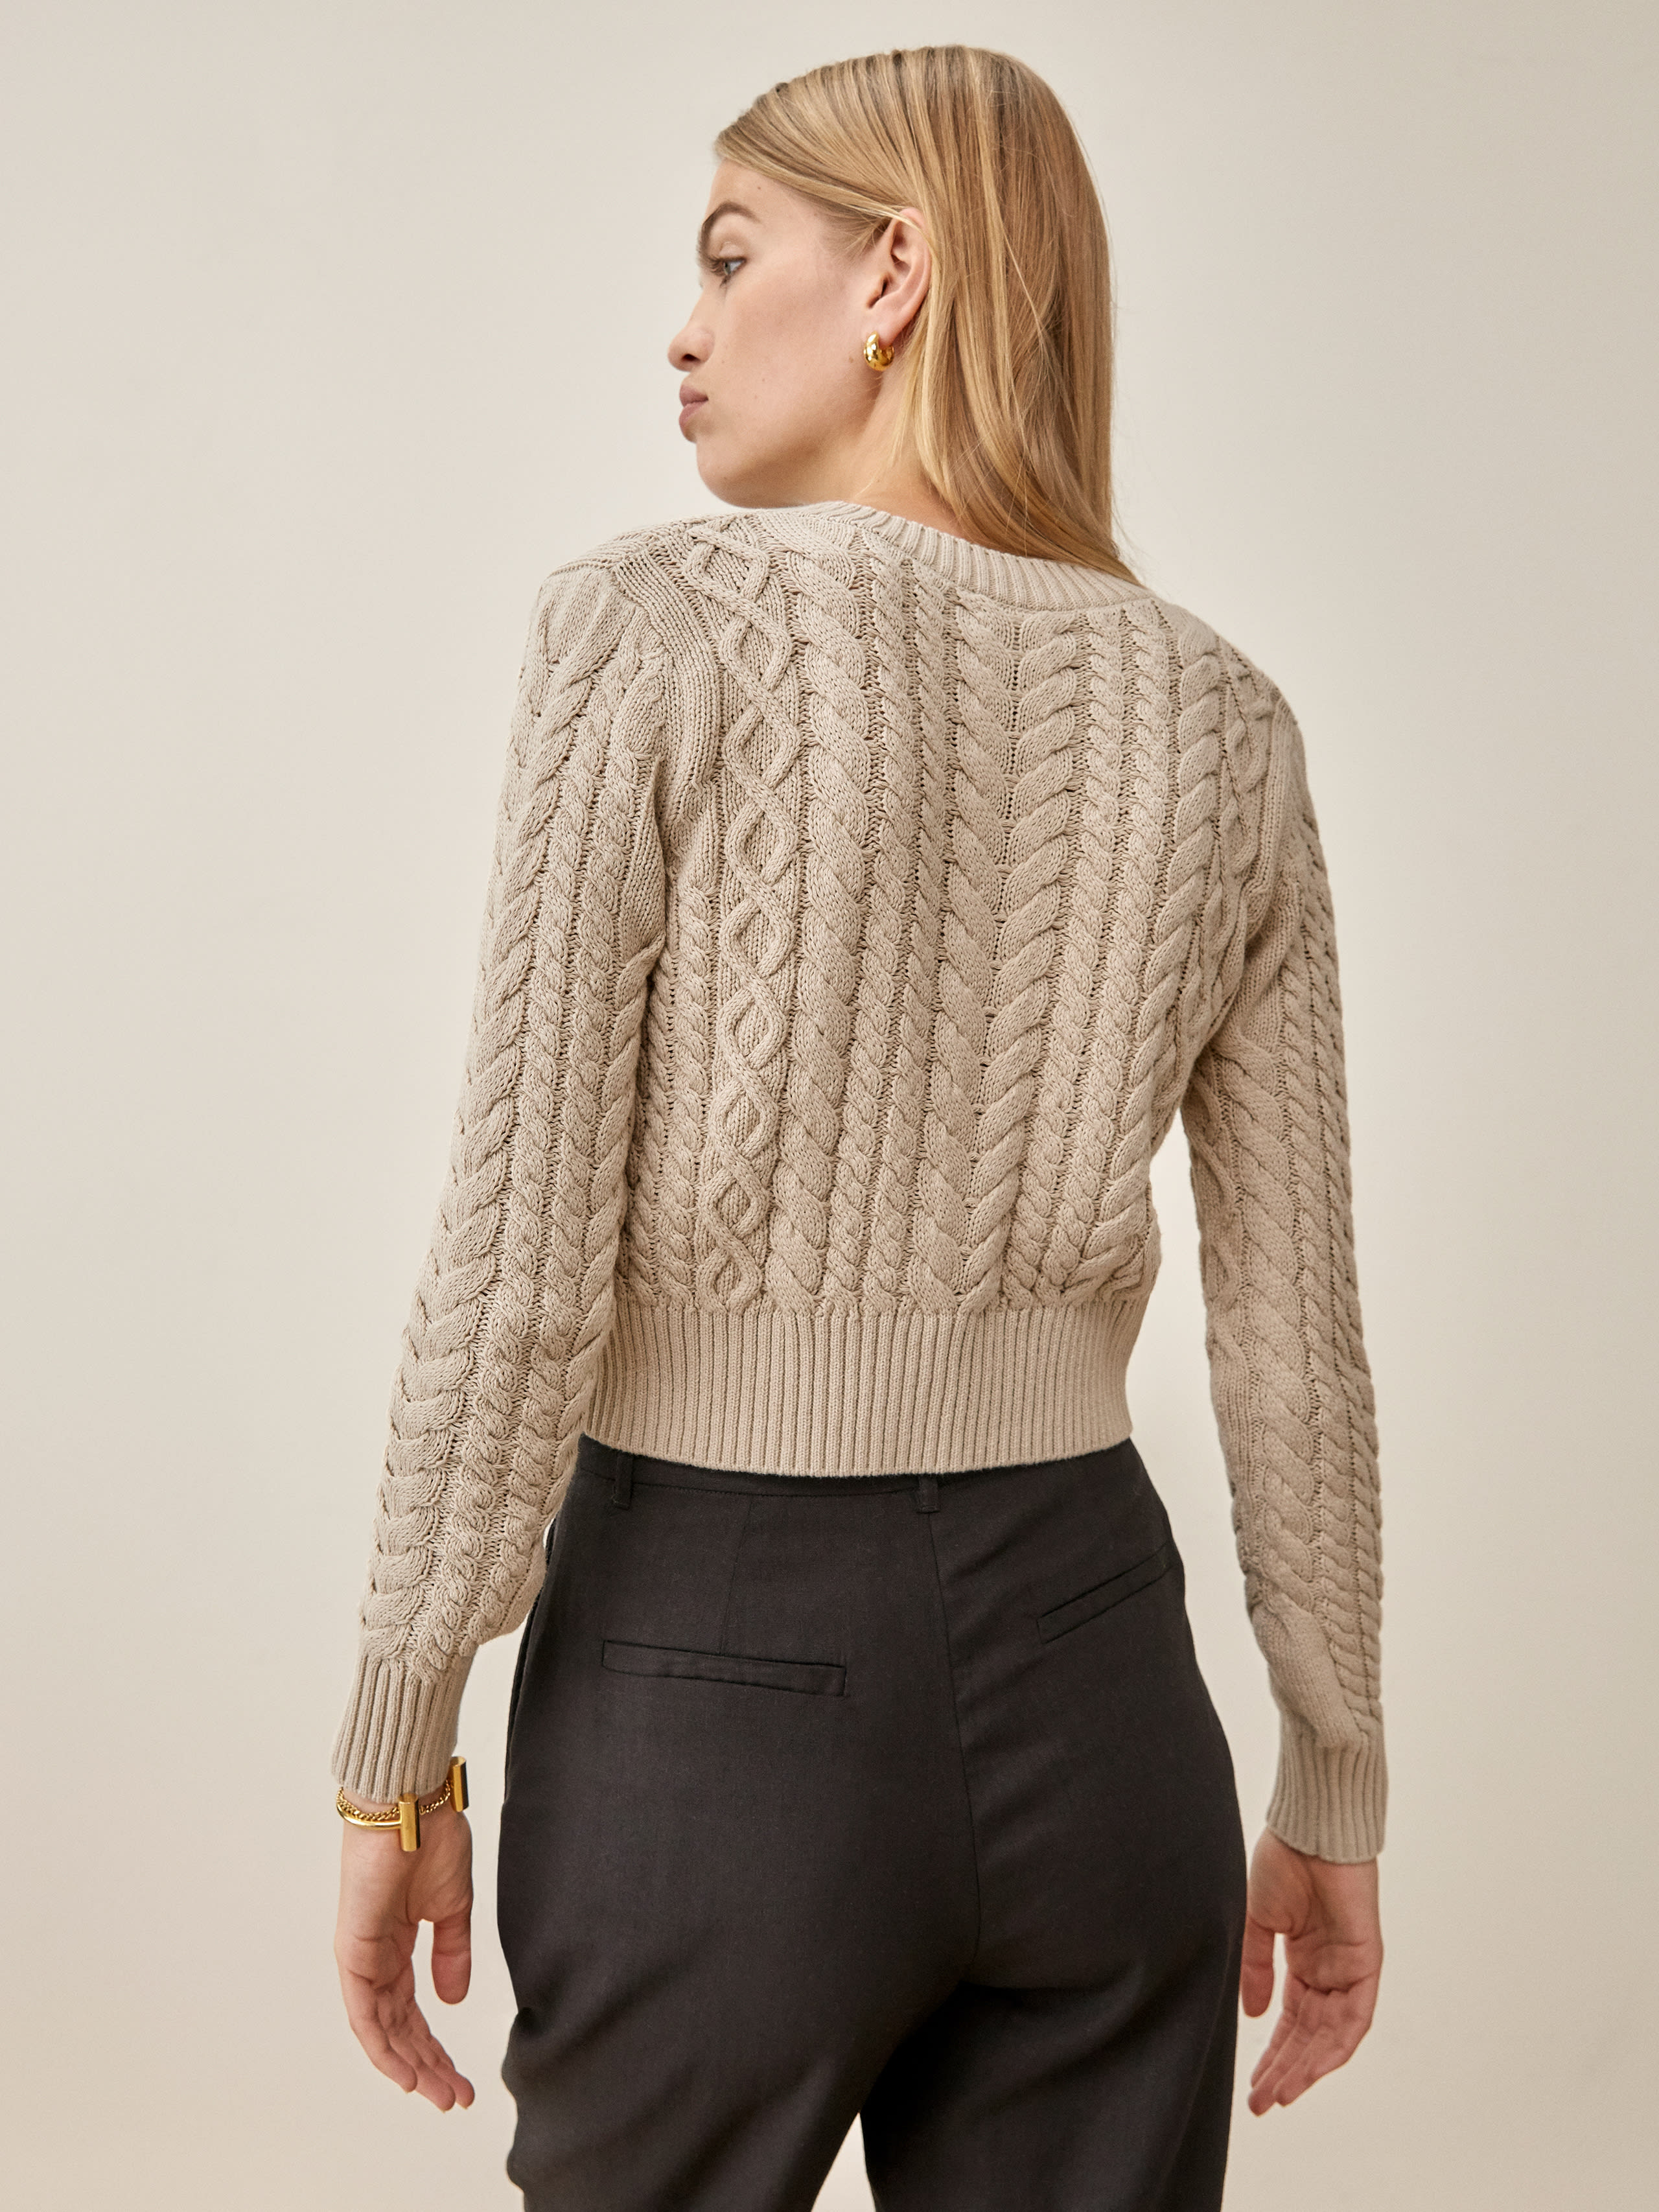 Foret Cable Knit Cardigan, thumbnail image 3